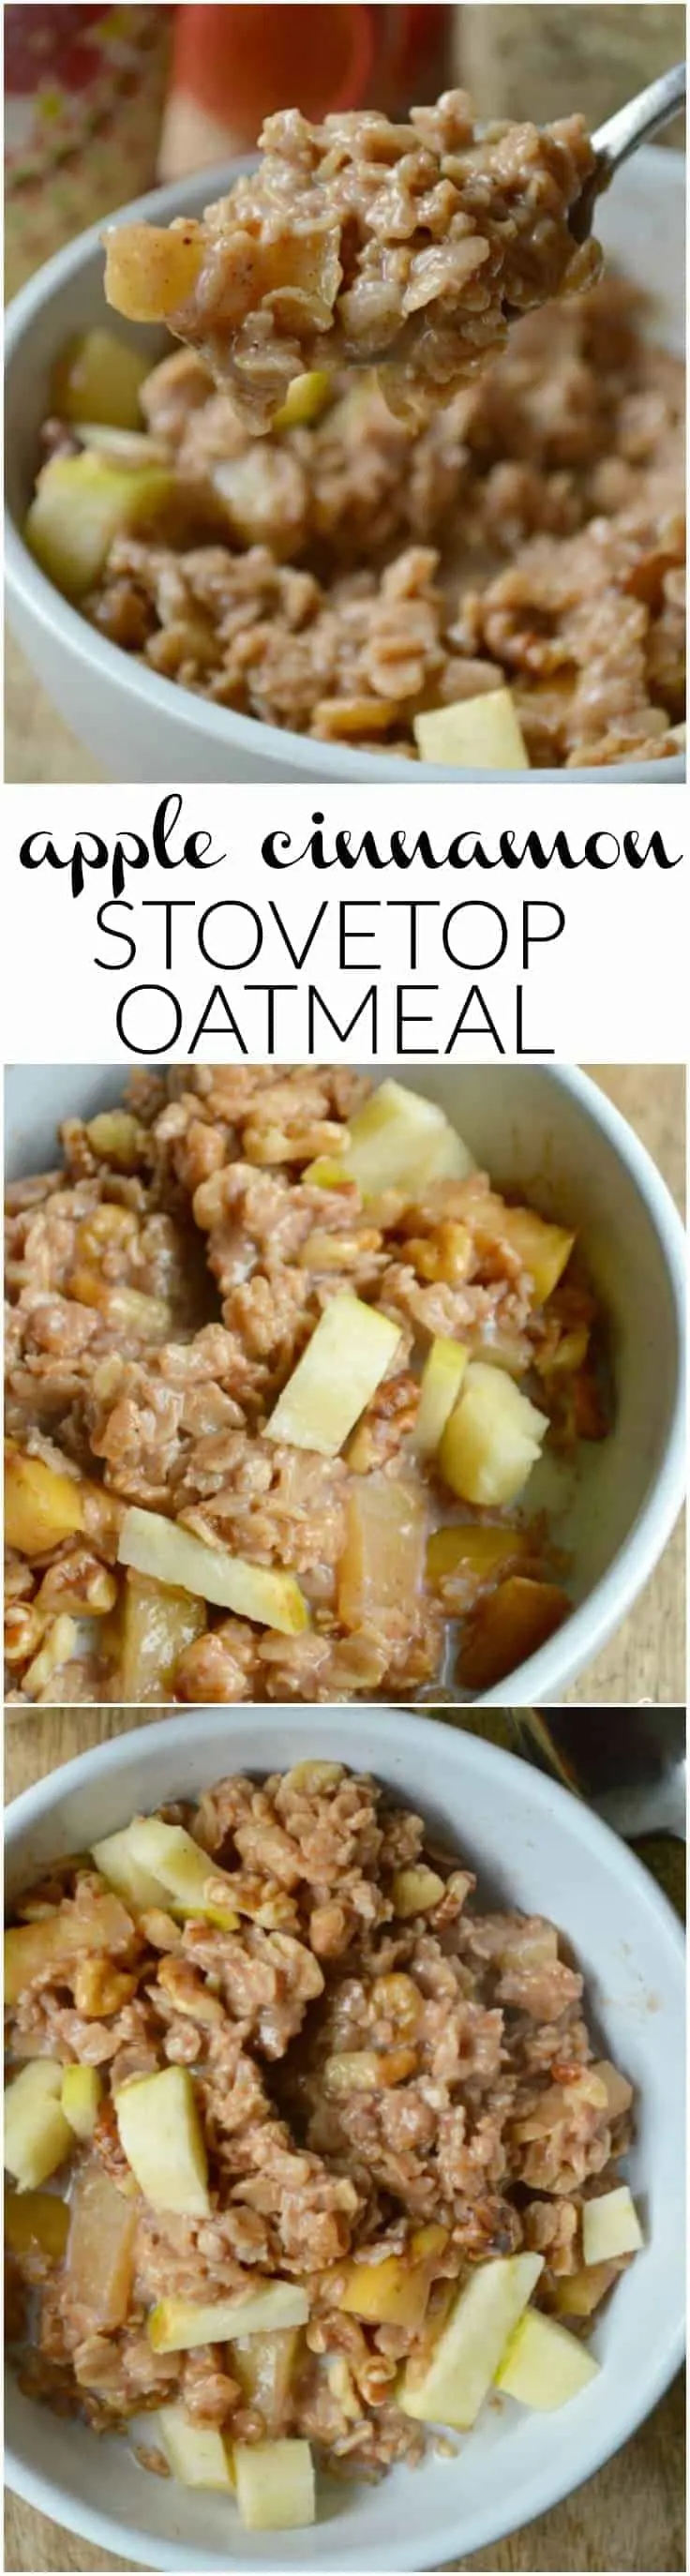 If you love the flavors of apple pie, this easy Apple Cinnamon Stovetop Oatmeal Recipe is for you!